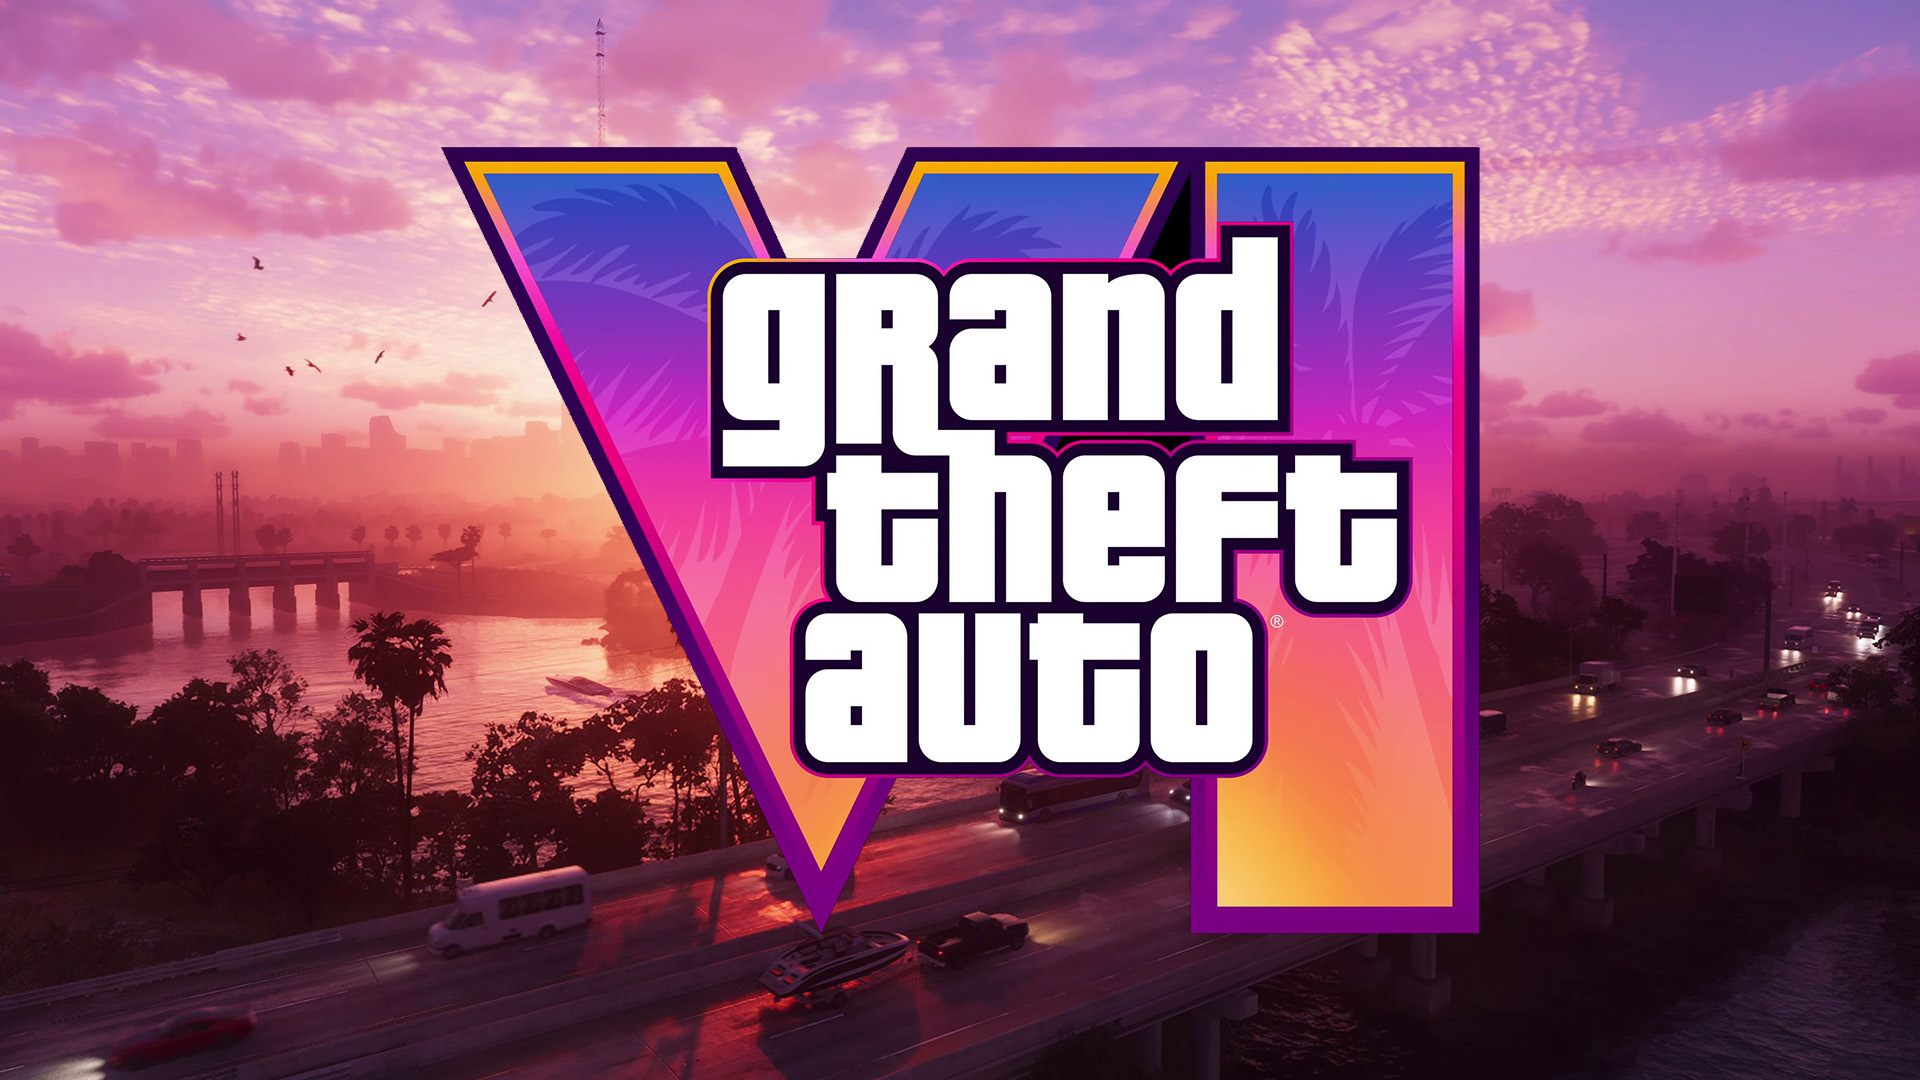 Every Grand Theft Auto Trailer From GTA to GTA 6 